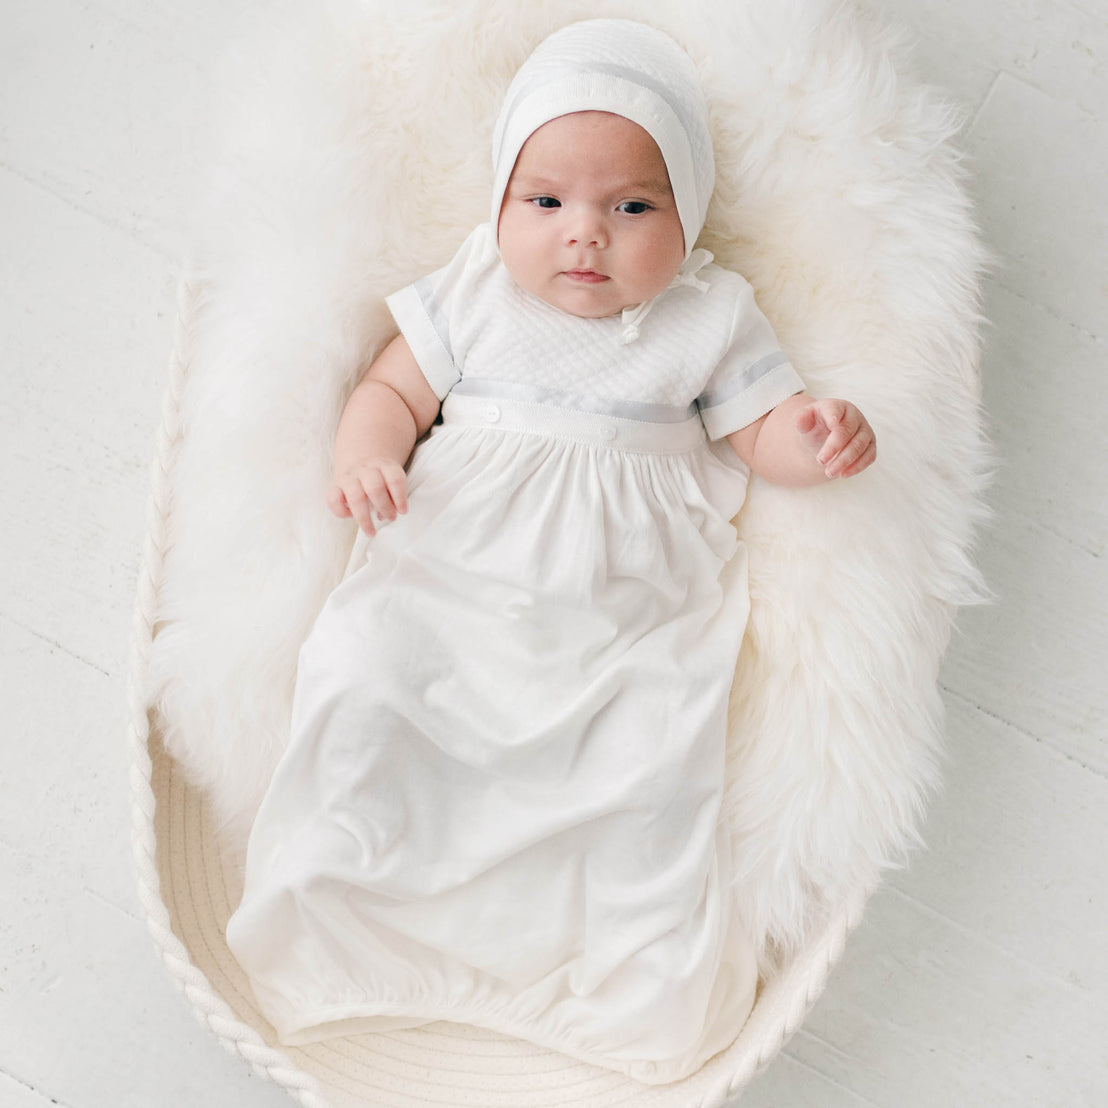 Newborn baby boy sitting in a white fur-lined crib. He is wearing the Owen Layette and Quilted Newborn Bonnet.